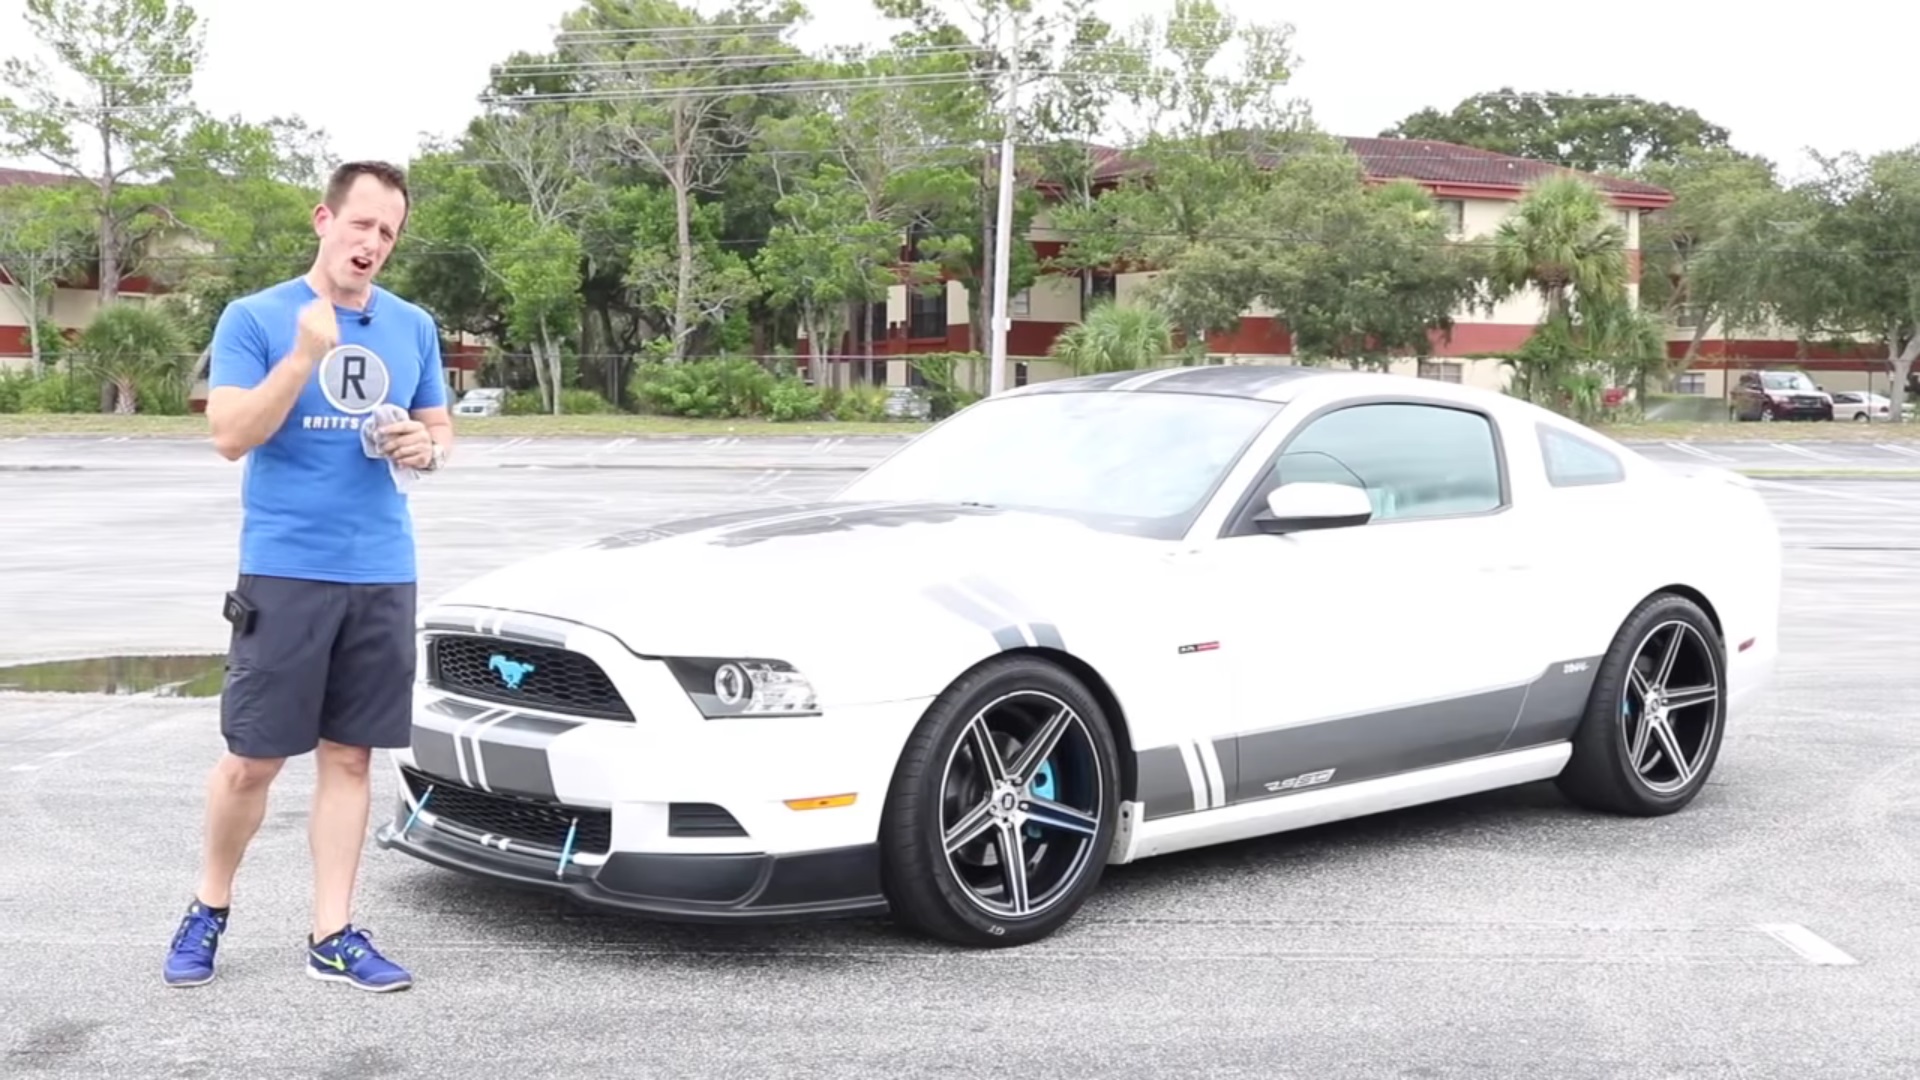 Video: Can A Modified 2013 Ford Mustang V6 Perform Like A 500 hp V8?